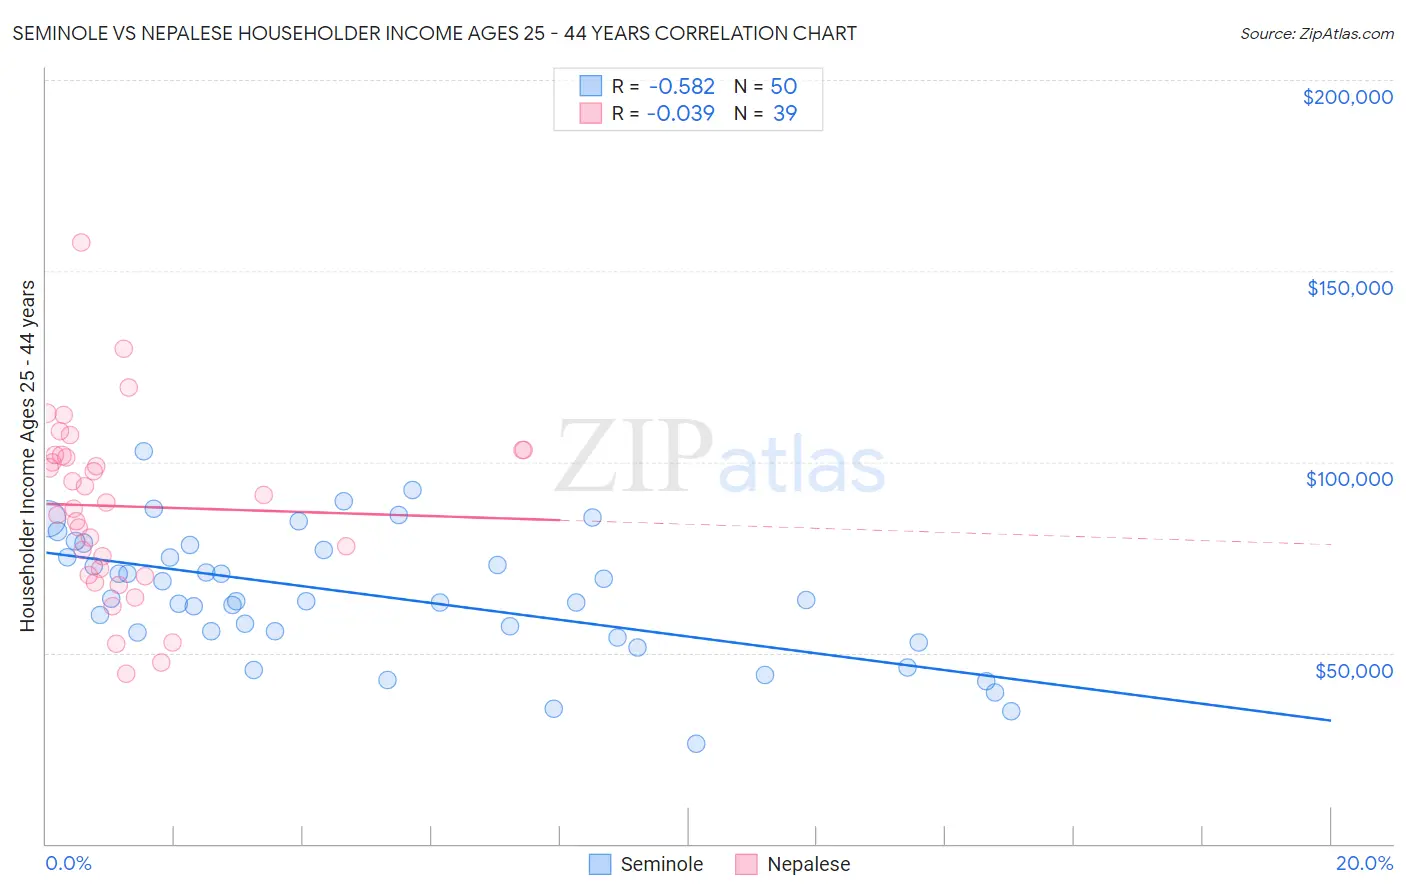 Seminole vs Nepalese Householder Income Ages 25 - 44 years